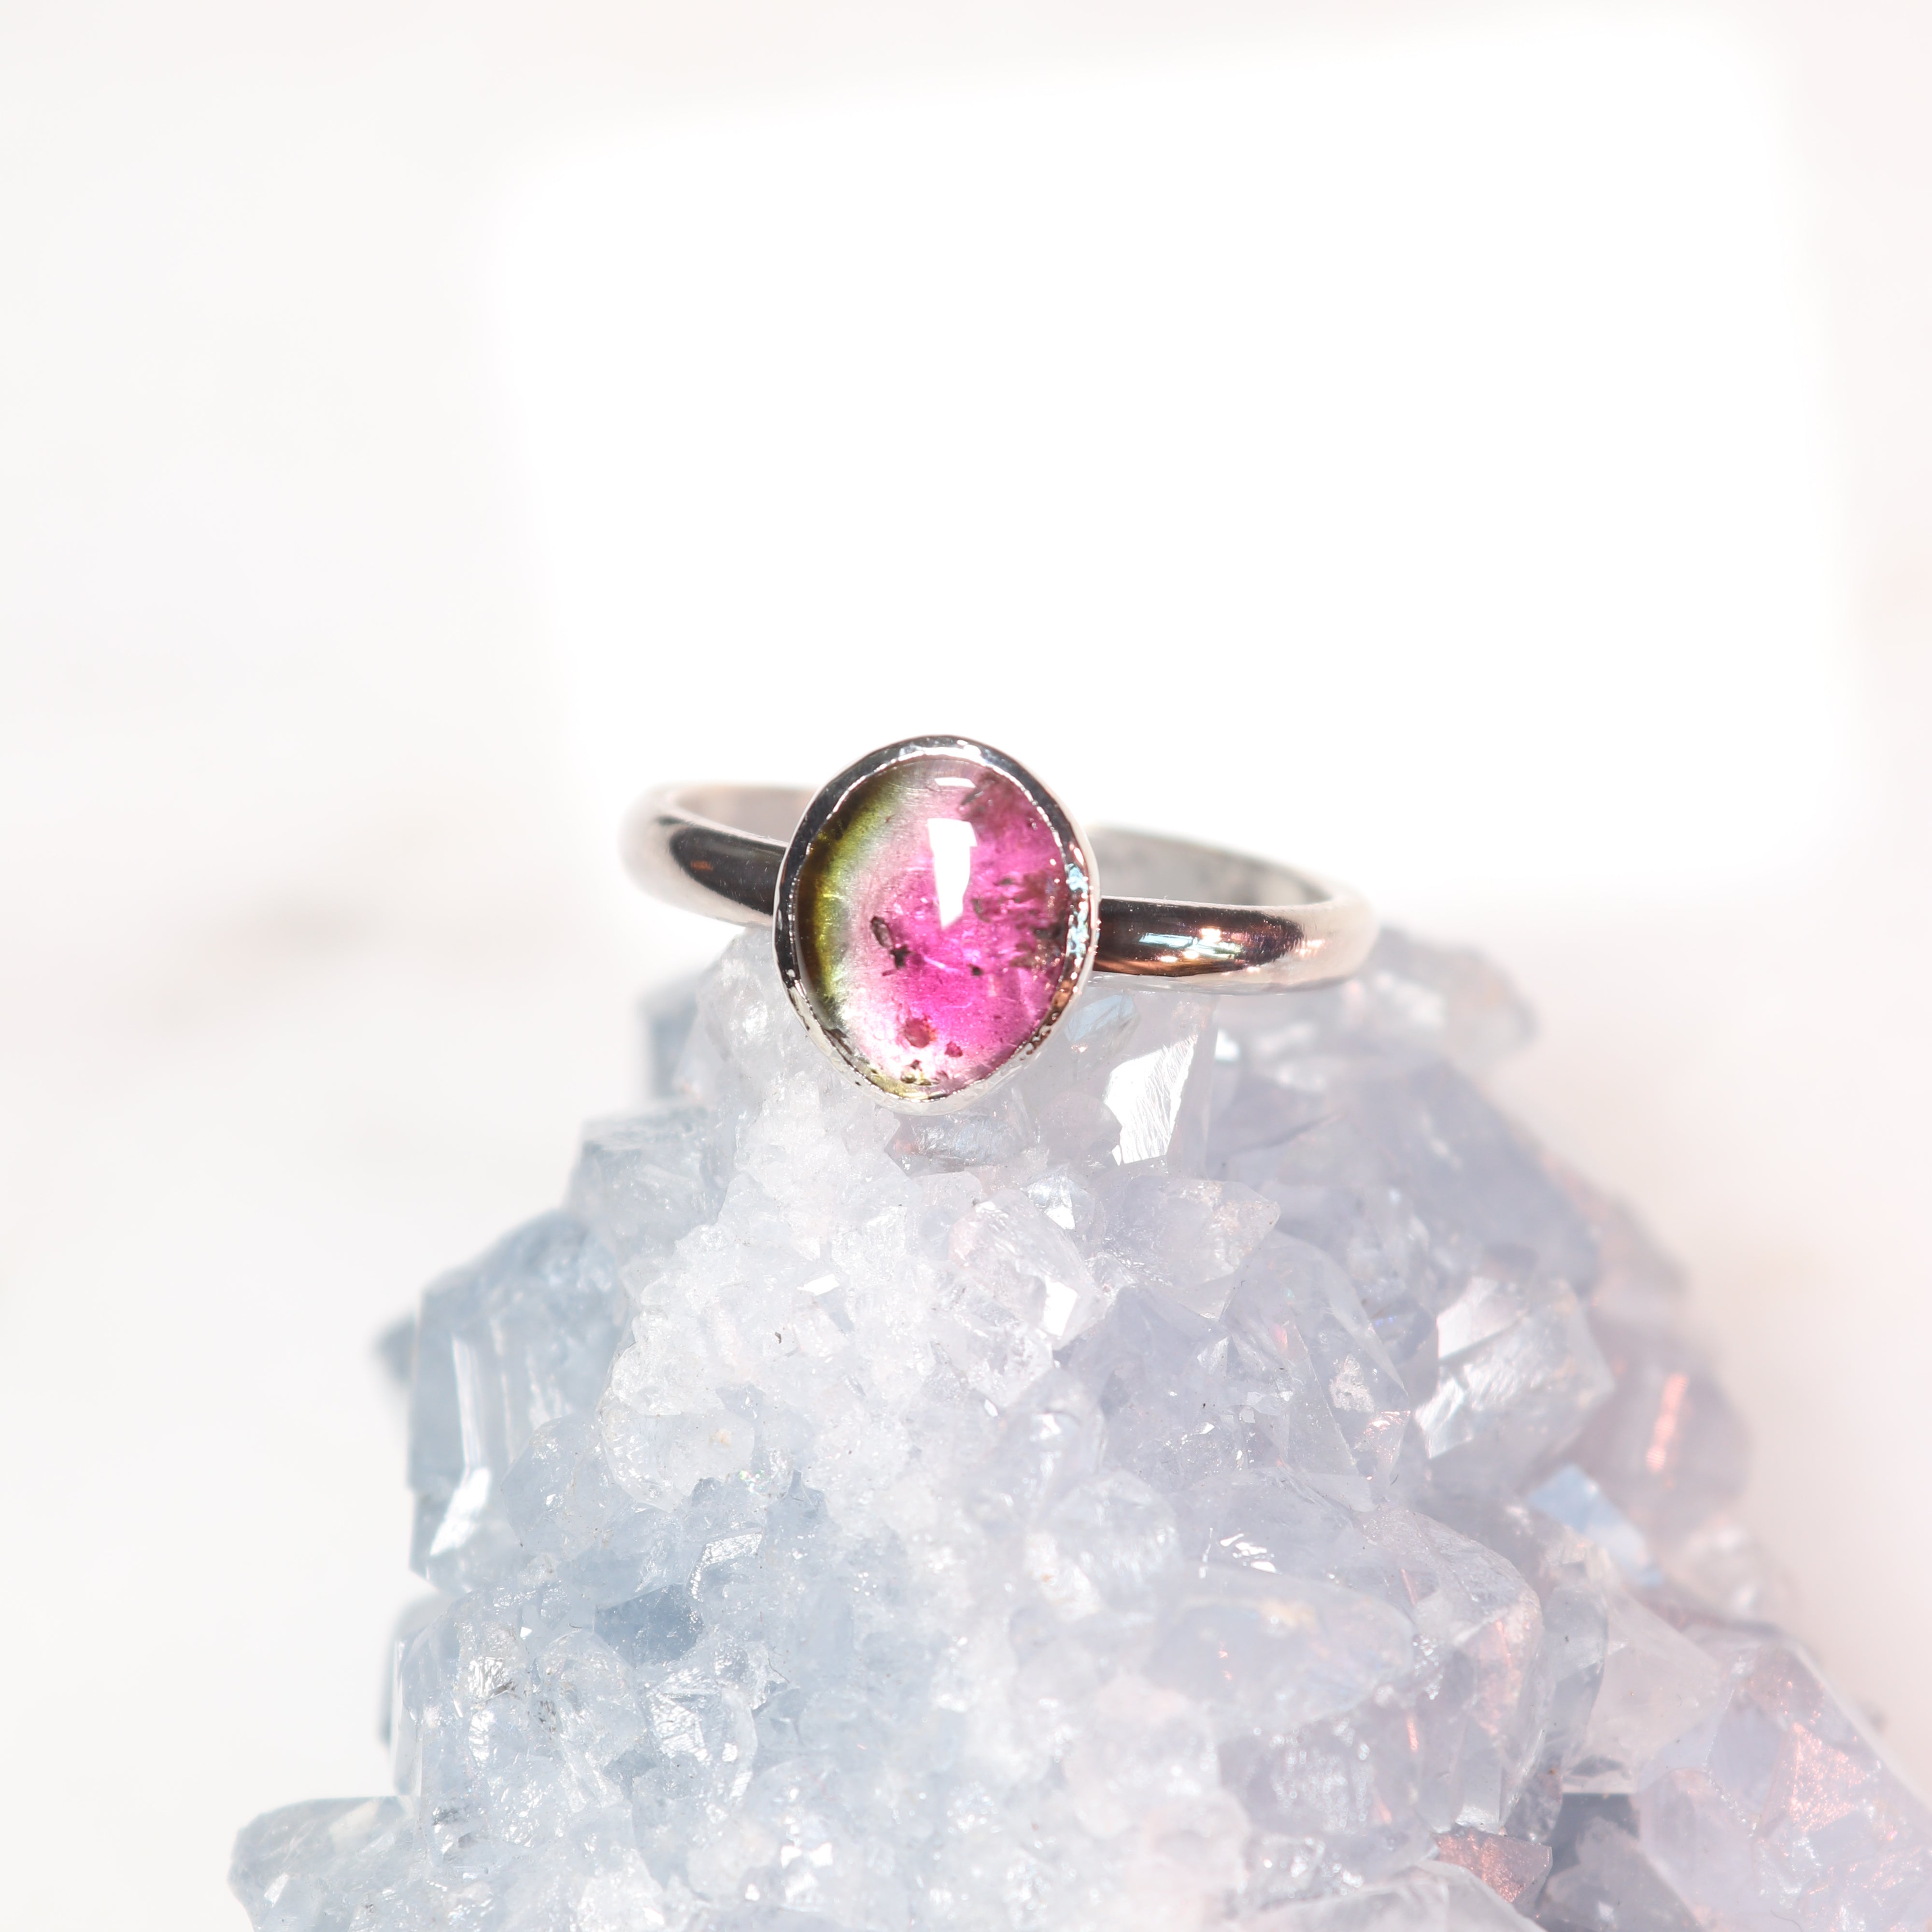 Watermelon Tourmaline Stone Ring in Sterling Silver 